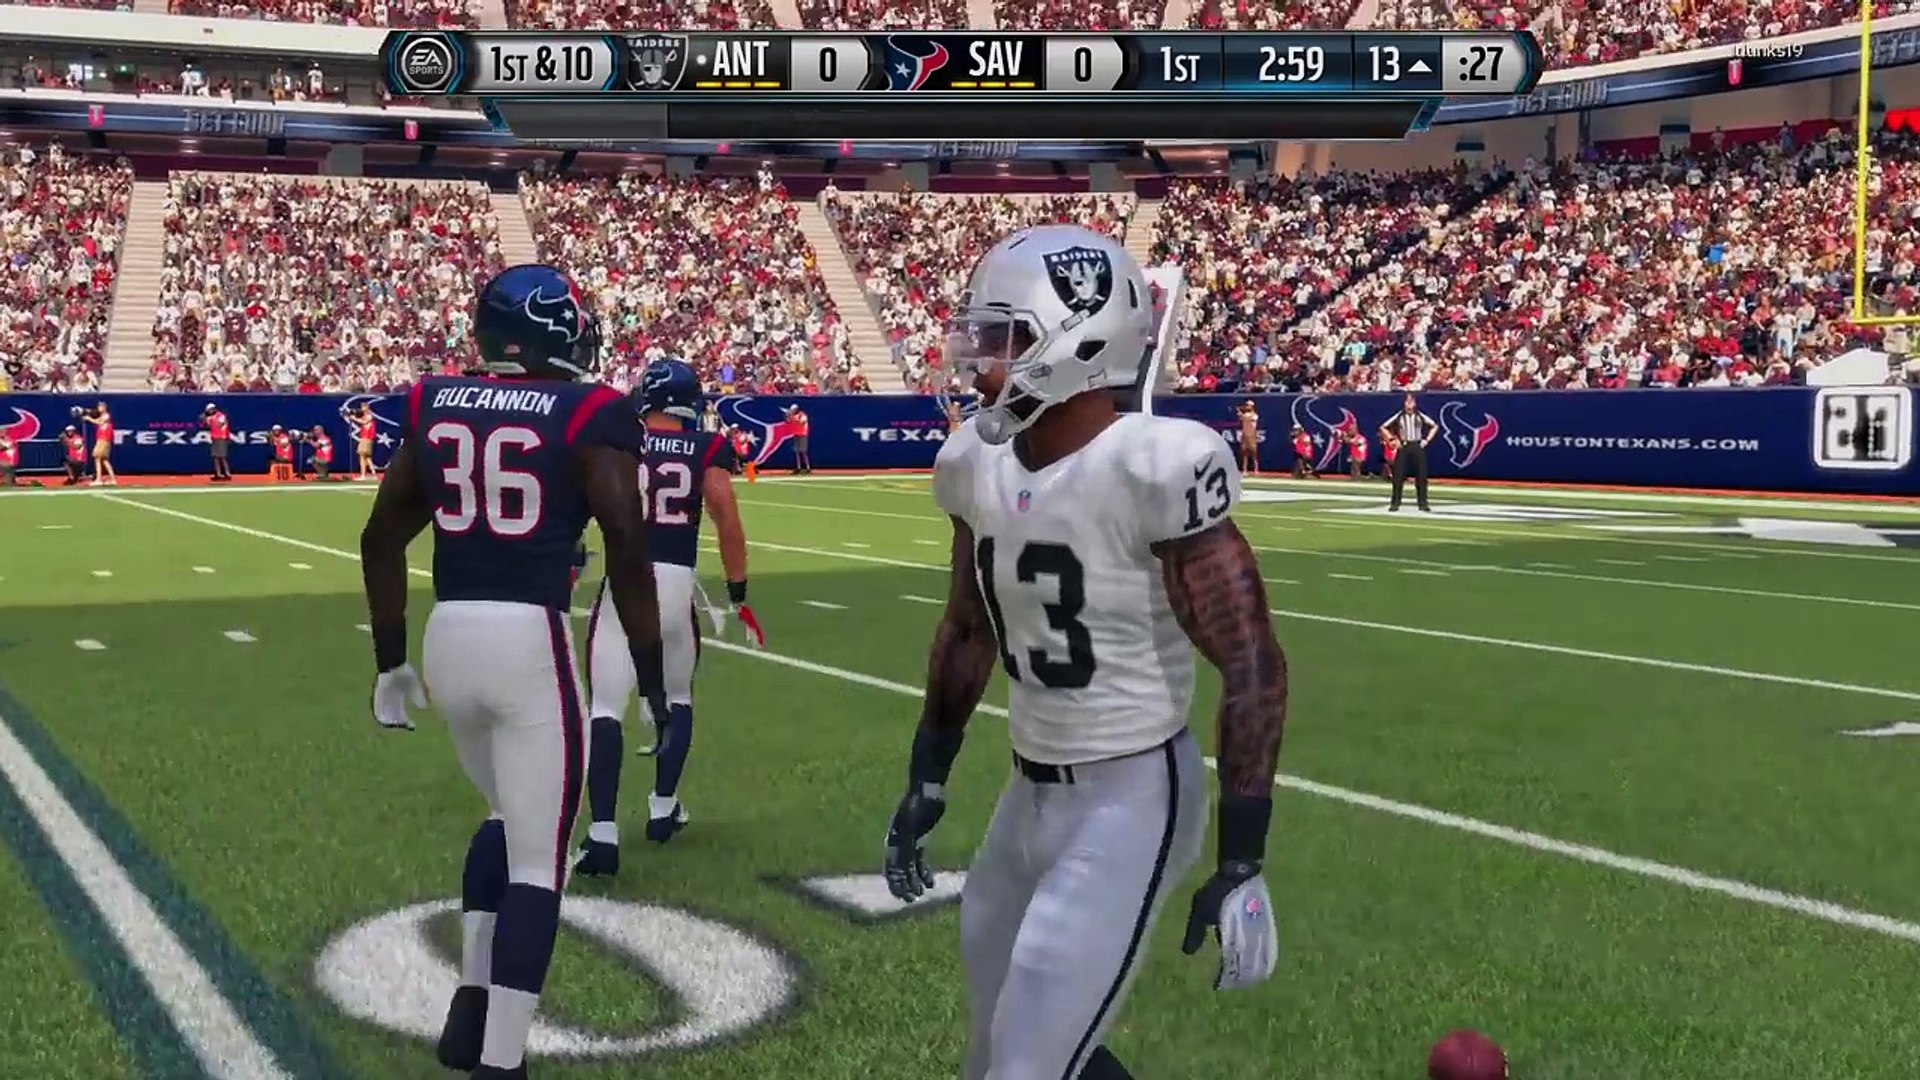 Madden 15 Ultimate Team matchmaking